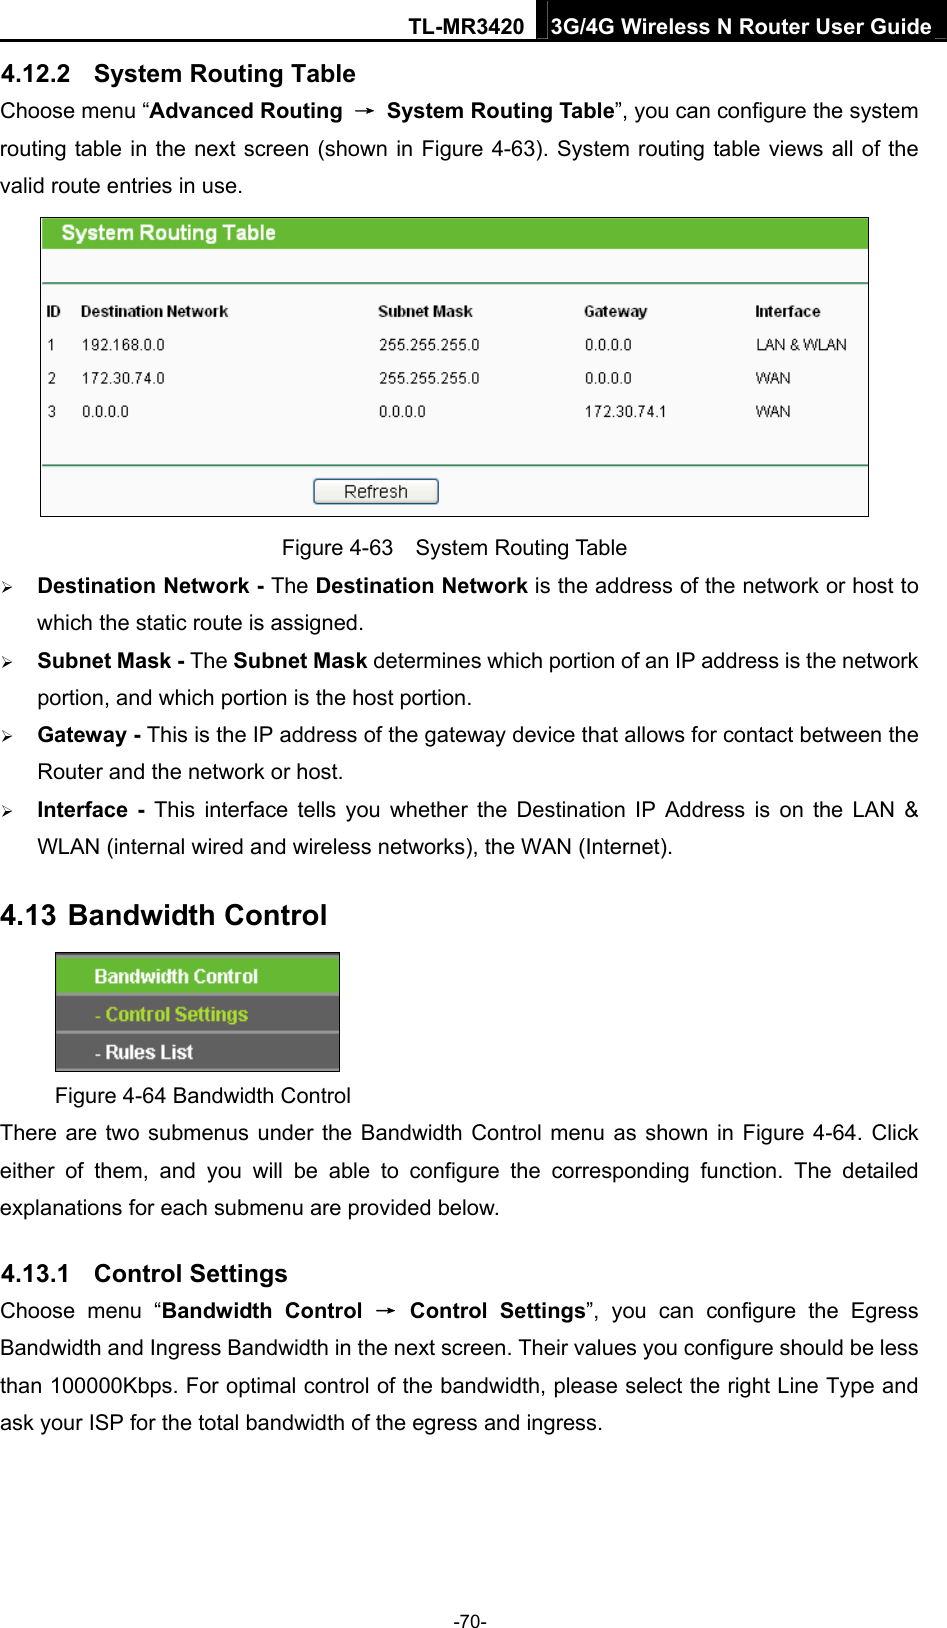 TL-MR3420 3G/4G Wireless N Router User Guide 4.12.2  System Routing Table Choose menu “Advanced Routing  → System Routing Table”, you can configure the system routing table in the next screen (shown in Figure 4-63). System routing table views all of the valid route entries in use.  Figure 4-63  System Routing Table  Destination Network - The Destination Network is the address of the network or host to which the static route is assigned.  Subnet Mask - The Subnet Mask determines which portion of an IP address is the network portion, and which portion is the host portion.  Gateway - This is the IP address of the gateway device that allows for contact between the Router and the network or host.  Interface - This interface tells you whether the Destination IP Address is on the LAN &amp; WLAN (internal wired and wireless networks), the WAN (Internet). 4.13 Bandwidth Control  Figure 4-64 Bandwidth Control There are two submenus under the Bandwidth Control menu as shown in Figure 4-64. Click either of them, and you will be able to configure the corresponding function. The detailed explanations for each submenu are provided below. 4.13.1  Control Settings Choose menu “Bandwidth Control → Control Settings”, you can configure the Egress Bandwidth and Ingress Bandwidth in the next screen. Their values you configure should be less than 100000Kbps. For optimal control of the bandwidth, please select the right Line Type and ask your ISP for the total bandwidth of the egress and ingress. -70- 